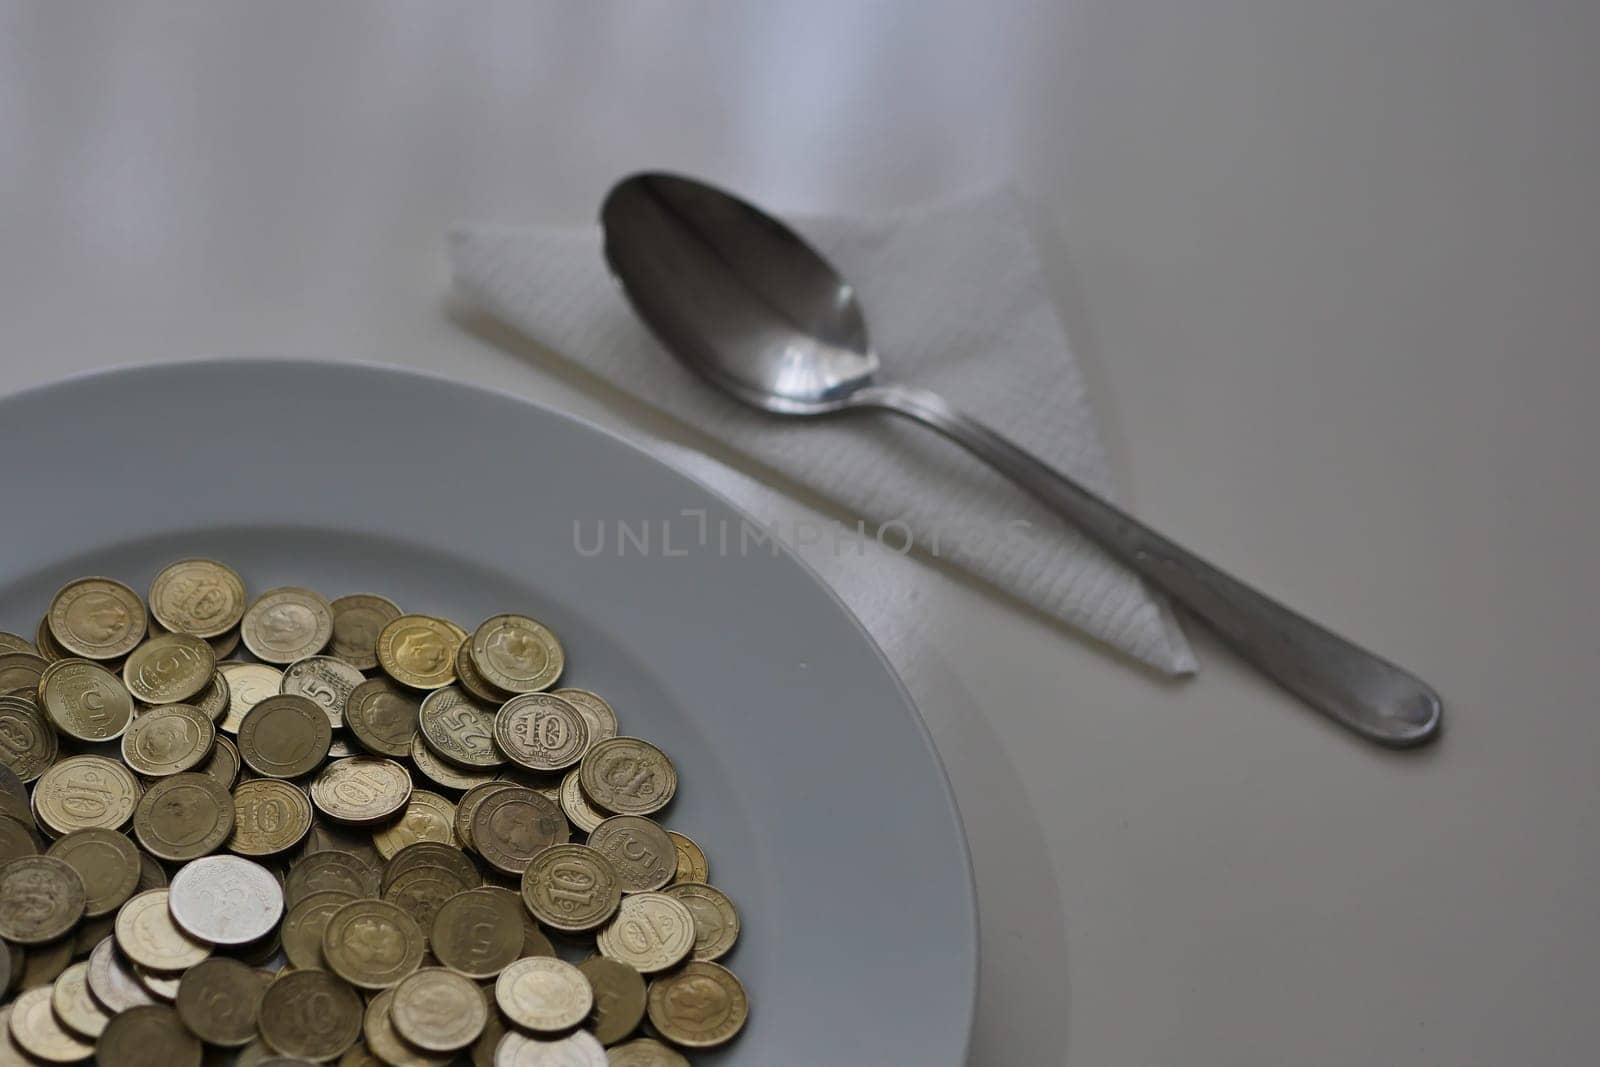 a plate full of coins on a table and a spoon next to it, spending money,